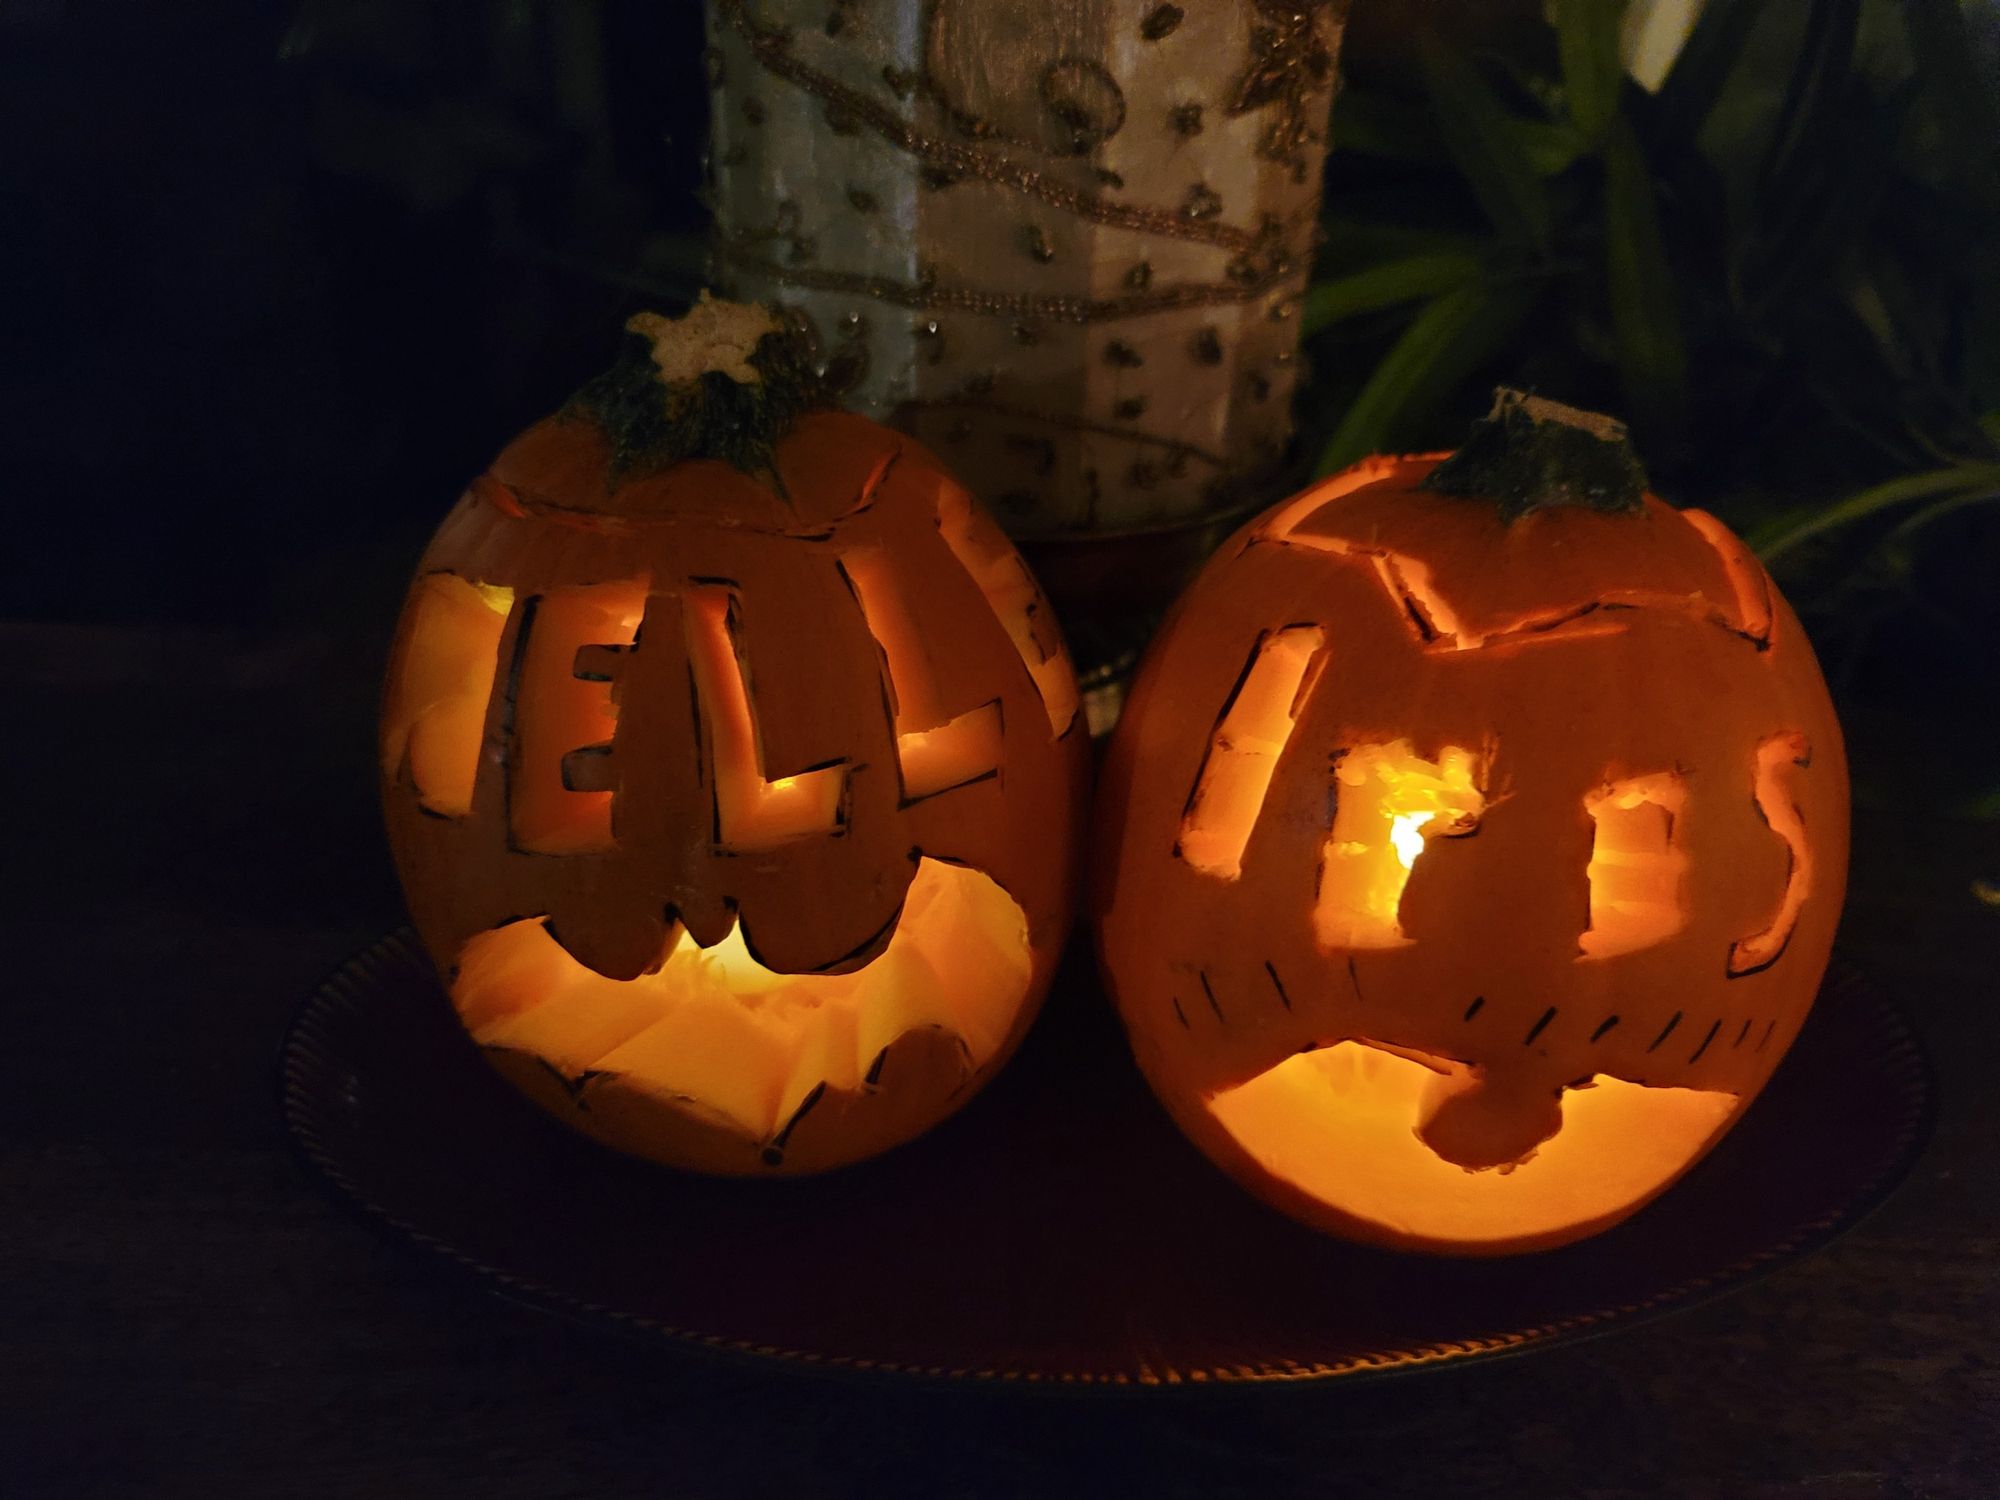 Two pumpkins with the names "Nelle" and "Iris" carved in them